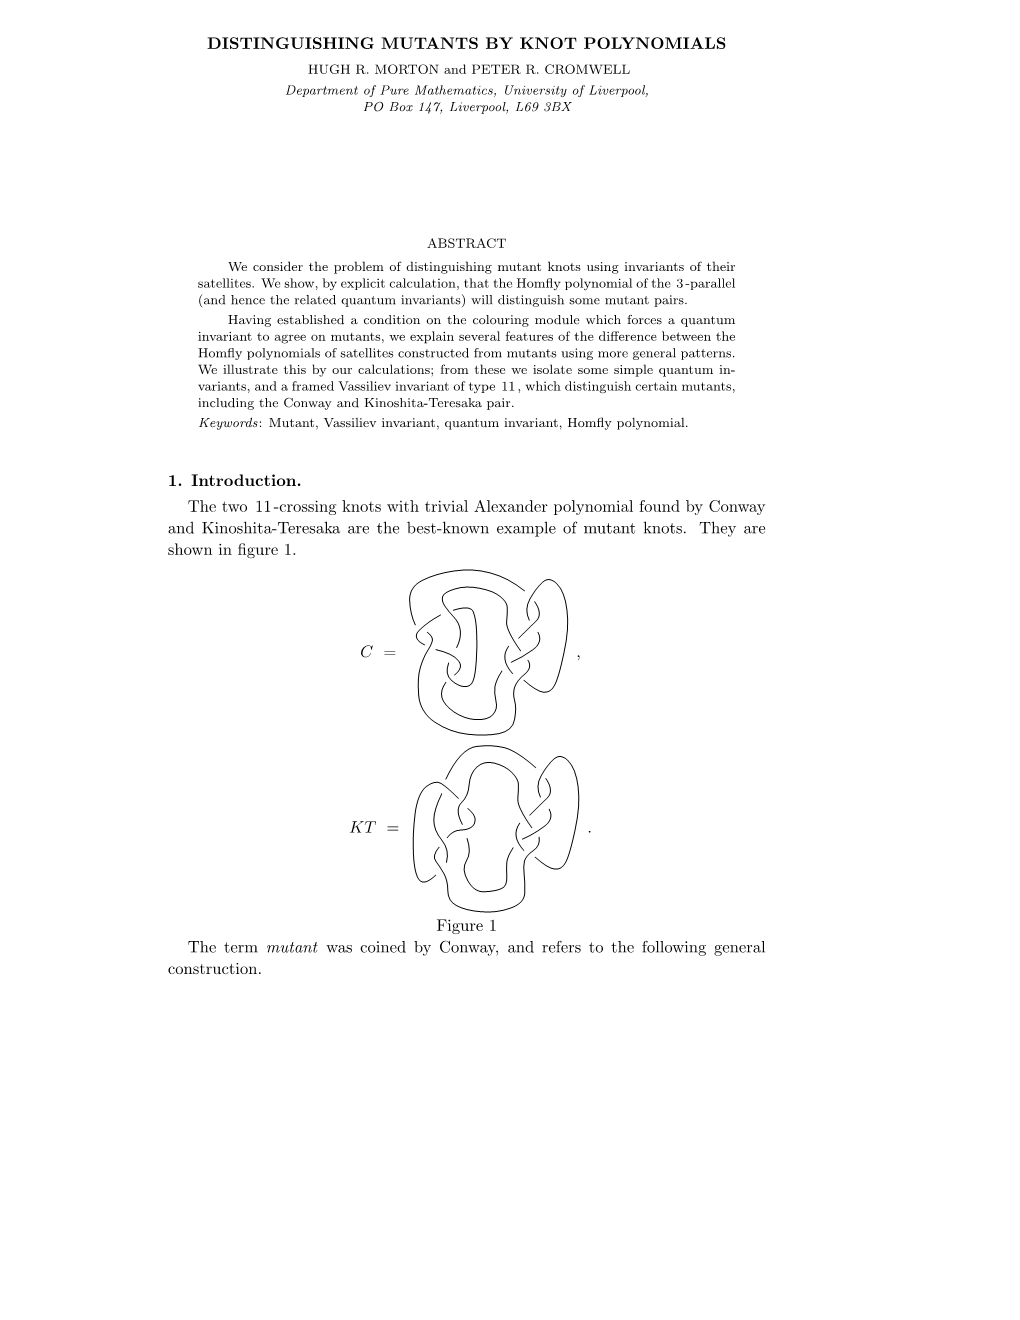 Distinguishing Mutants by Knot Polynomials 1